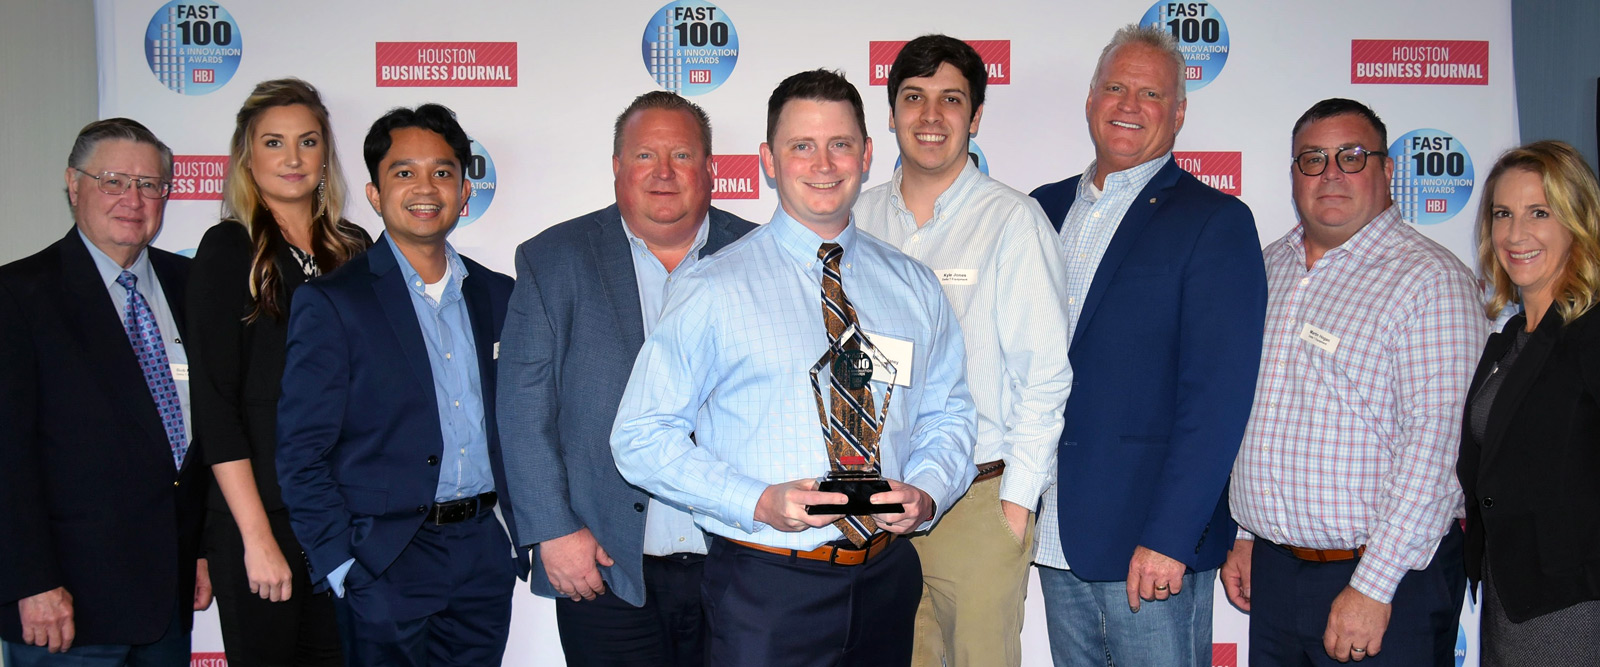 Total Pump Solutions team presented with 2021 HBJ Fast 100 award